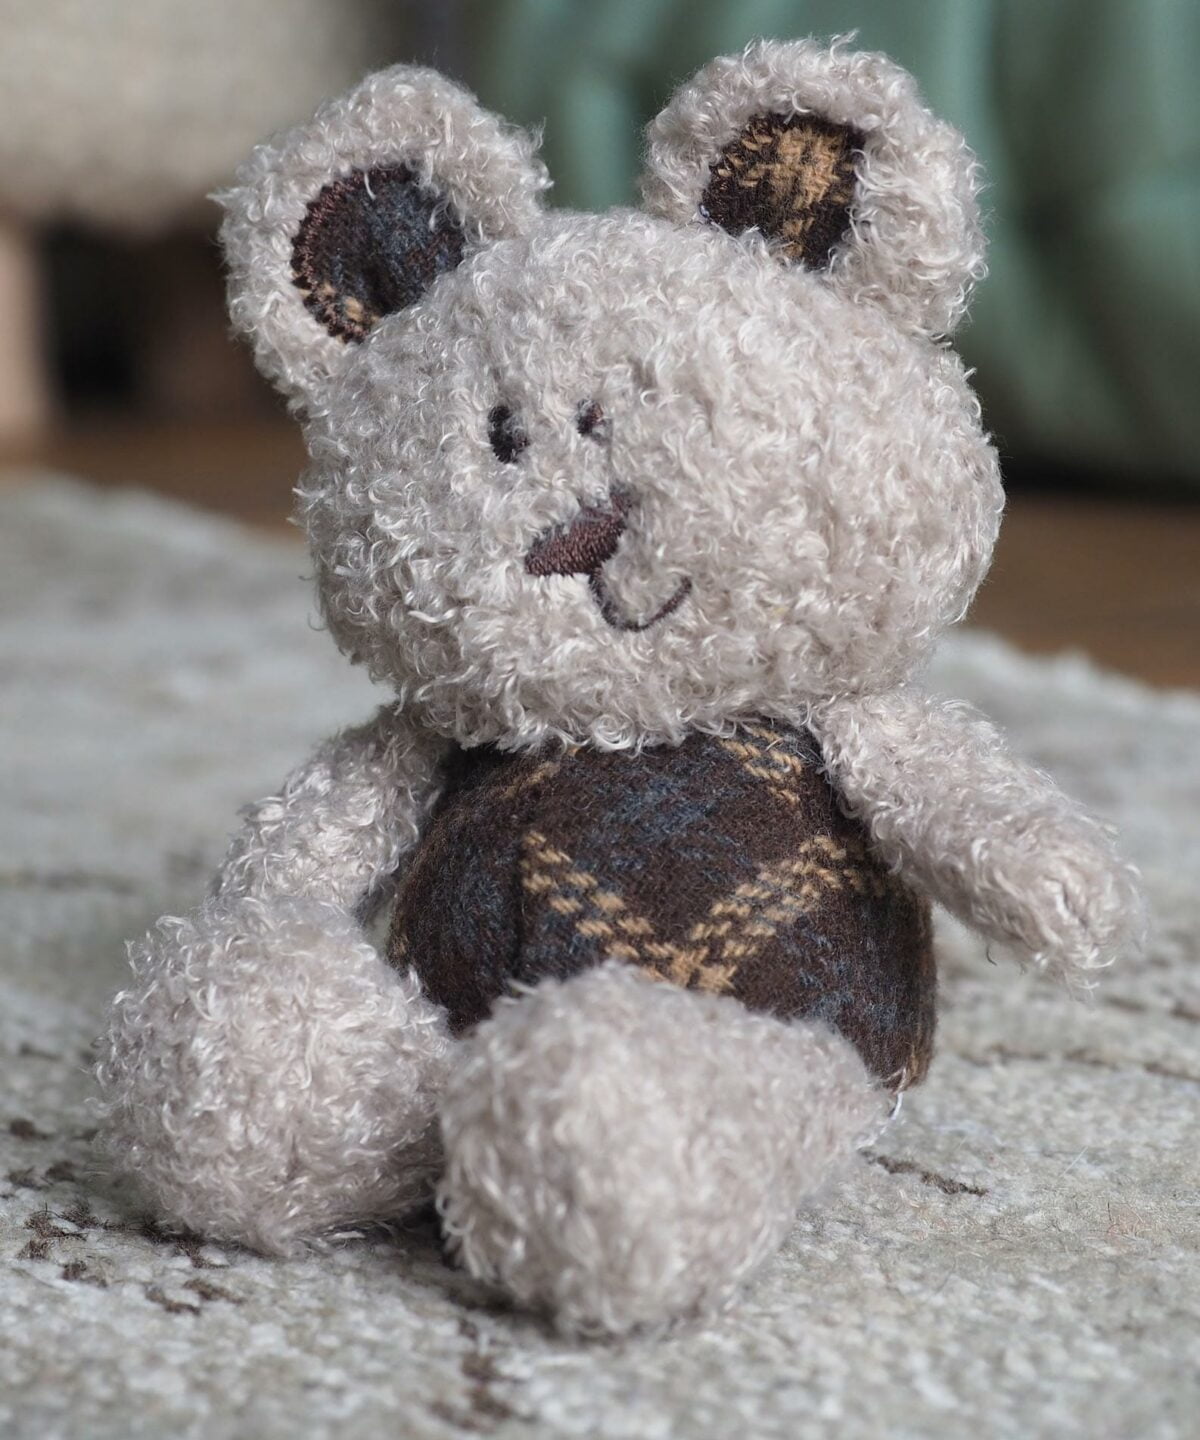 Little Ted Bear sitting on a rug